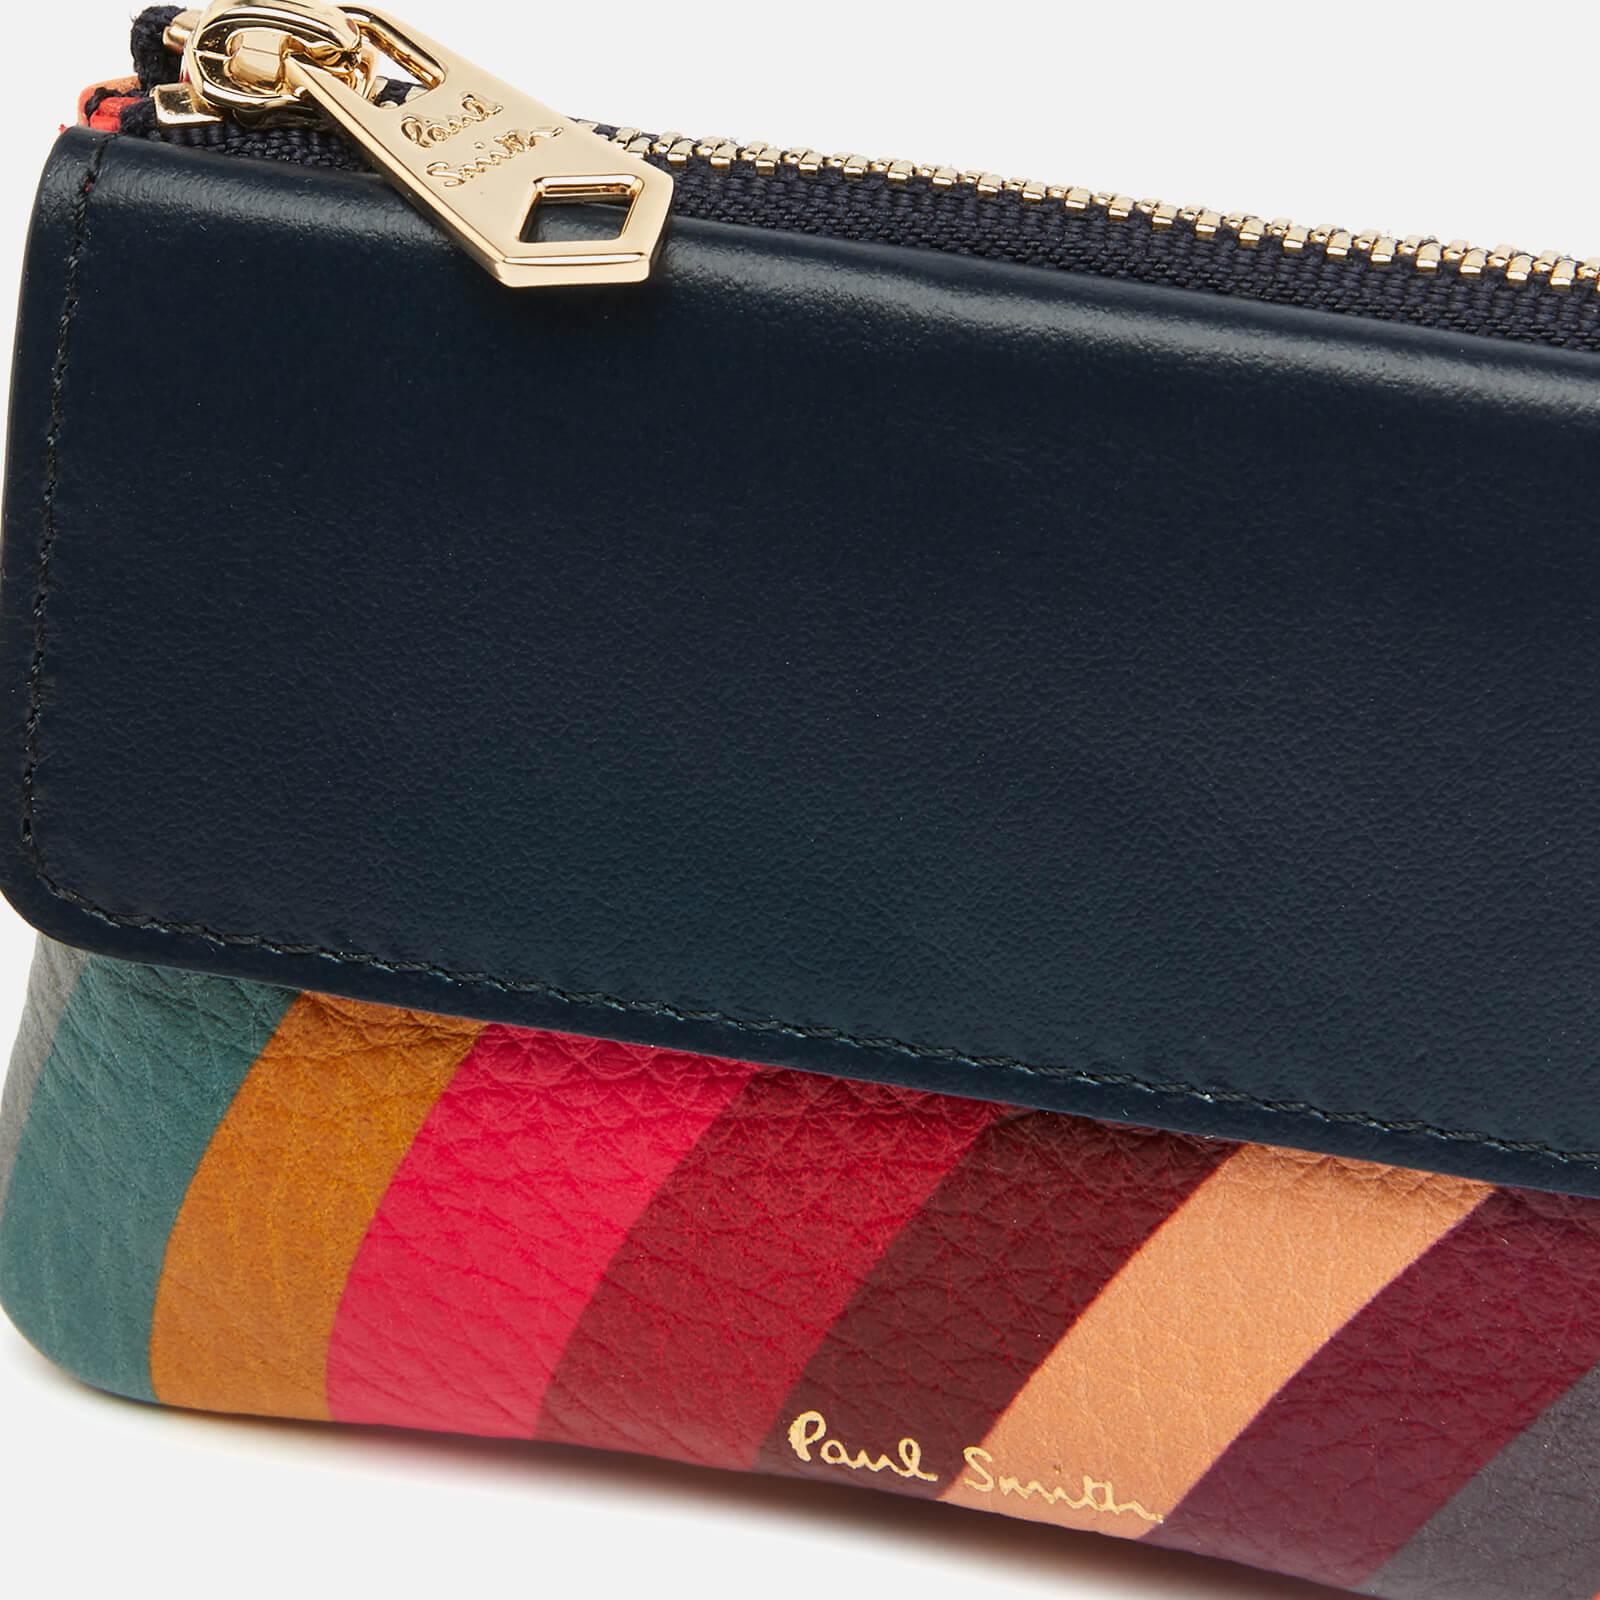 Paul Smith Small Zip Pouch Purse | Lyst